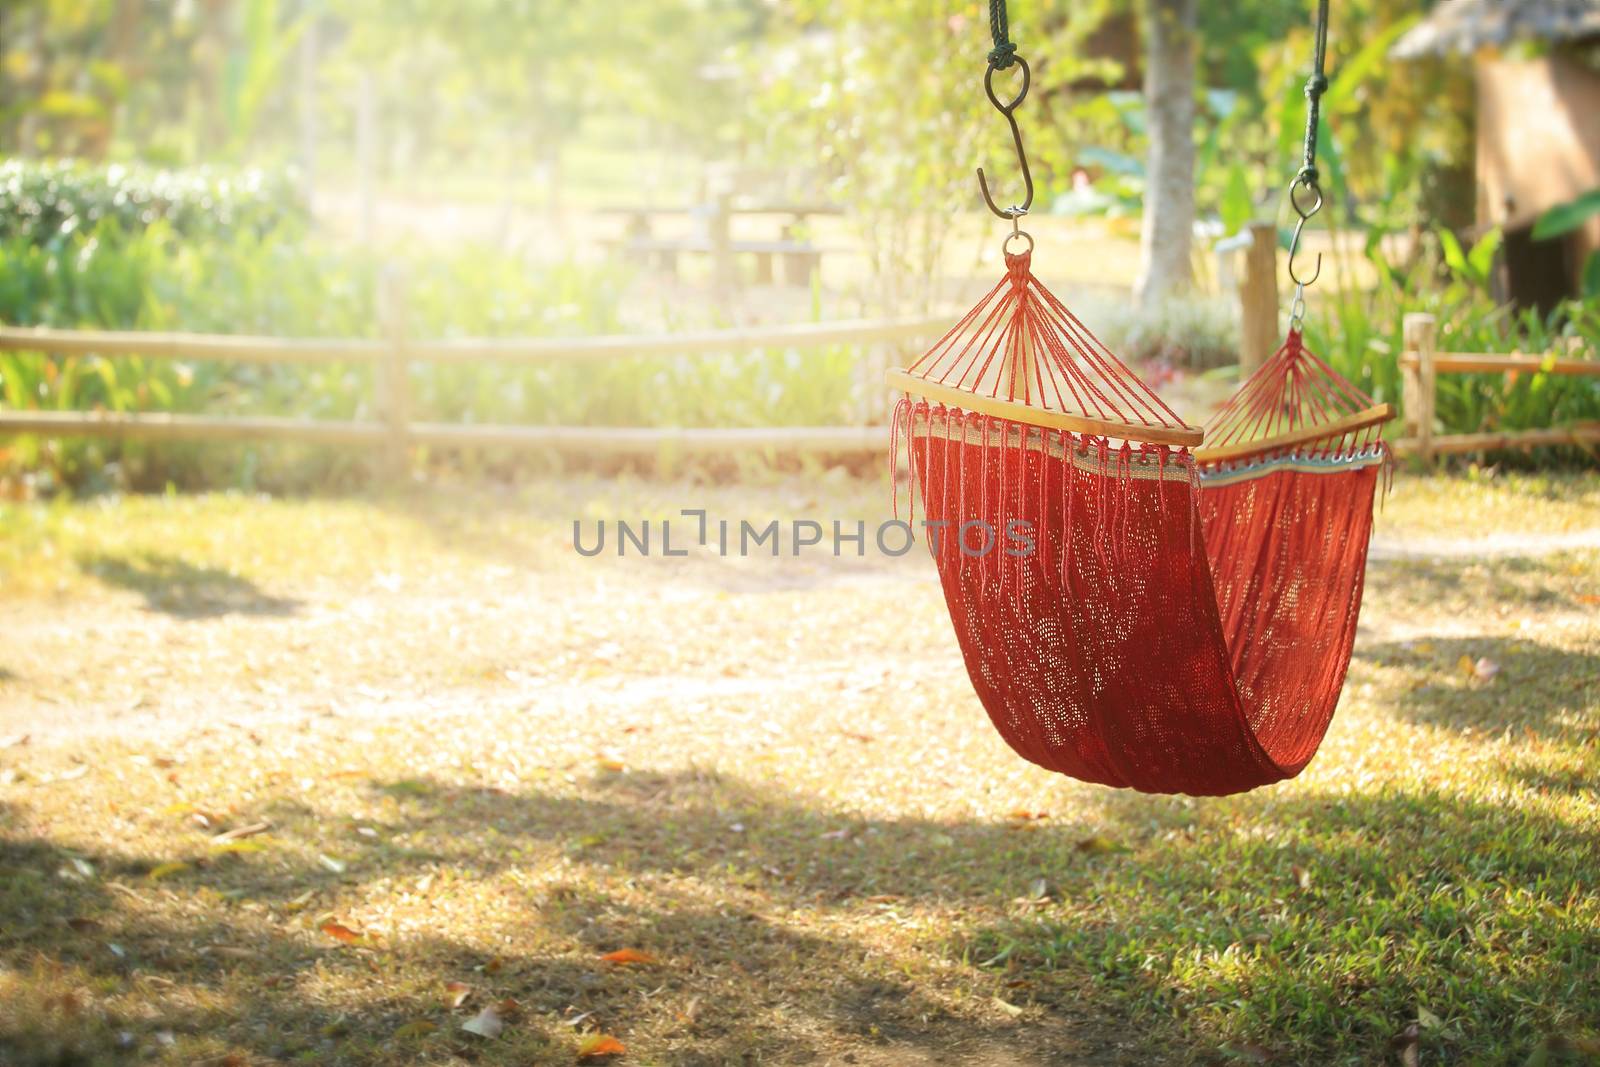 Lazy time with hammock in the summer garden, vintage toned.